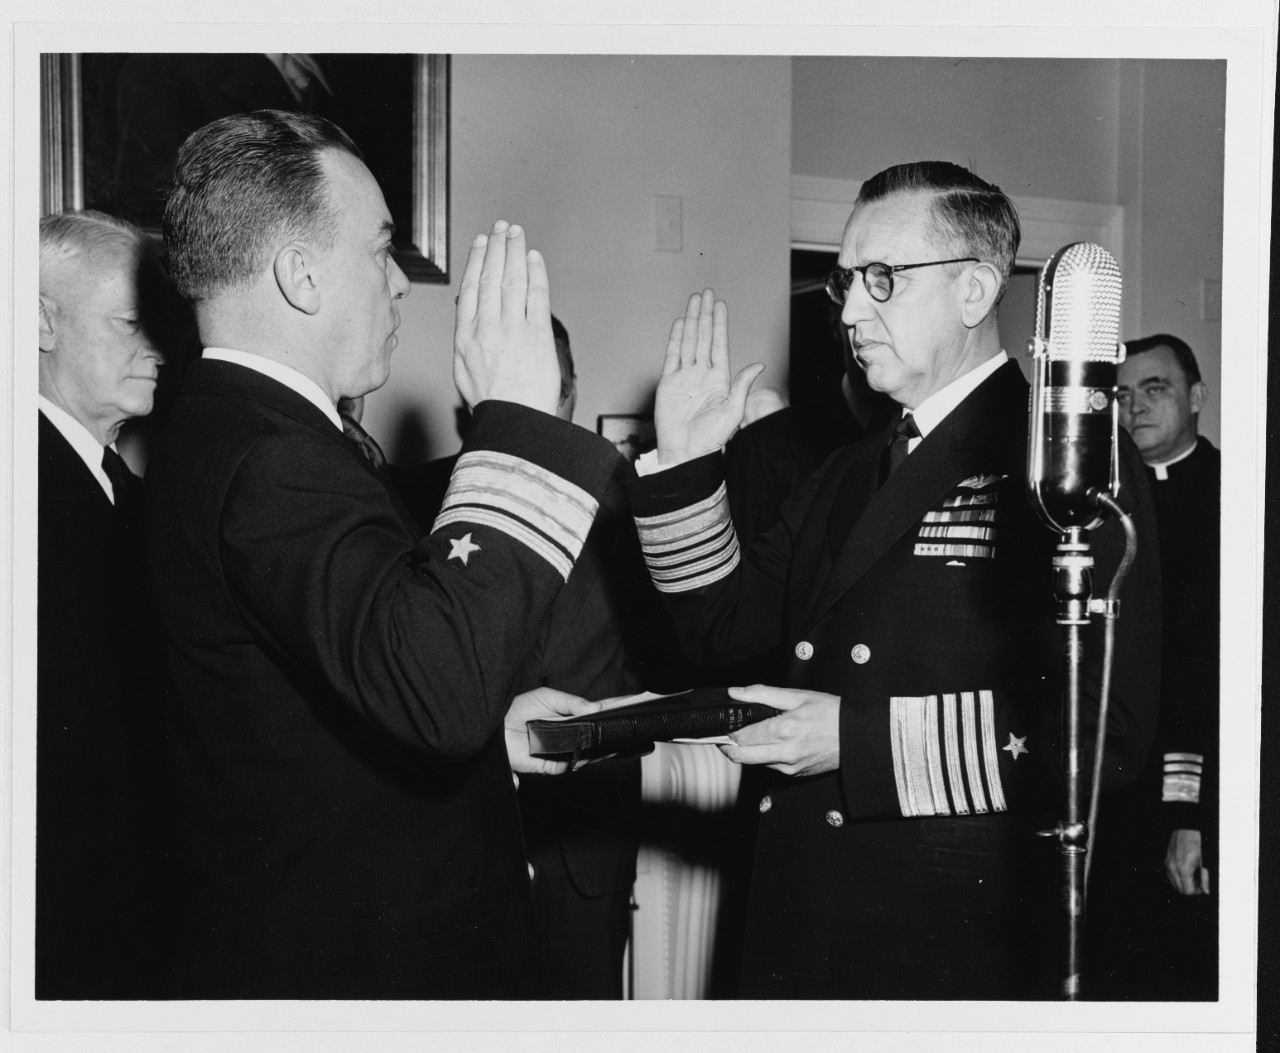 Swearing in ceremony of Admiral Louis E. Denfeld, U.S. Navy, as Chief of Naval Operations